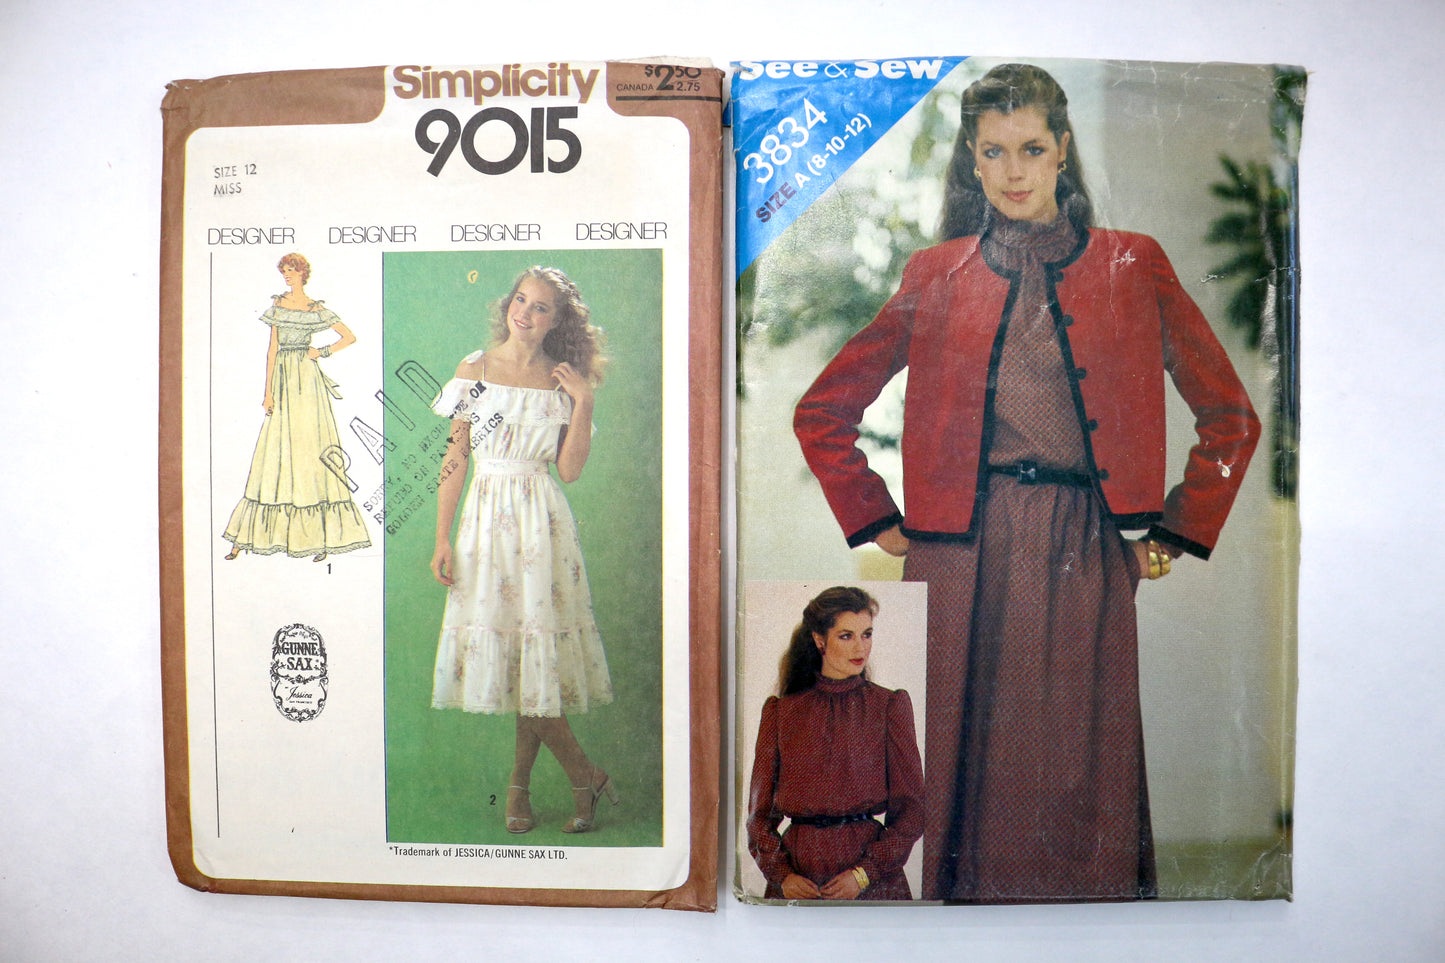 Simplicity 9015 Sewing Pattern or See & Sew 3834 Sewing Pattern